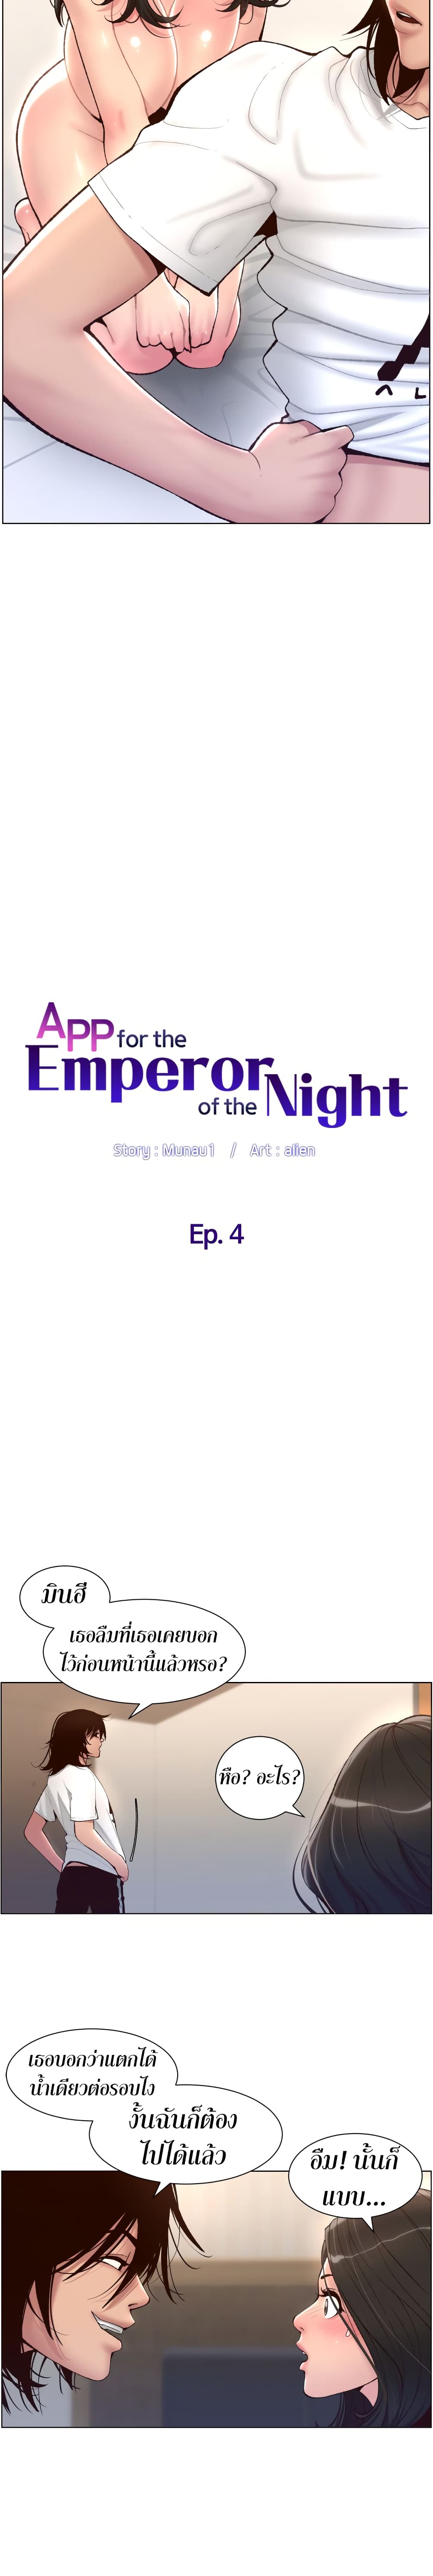 APP for the Emperor of the Night